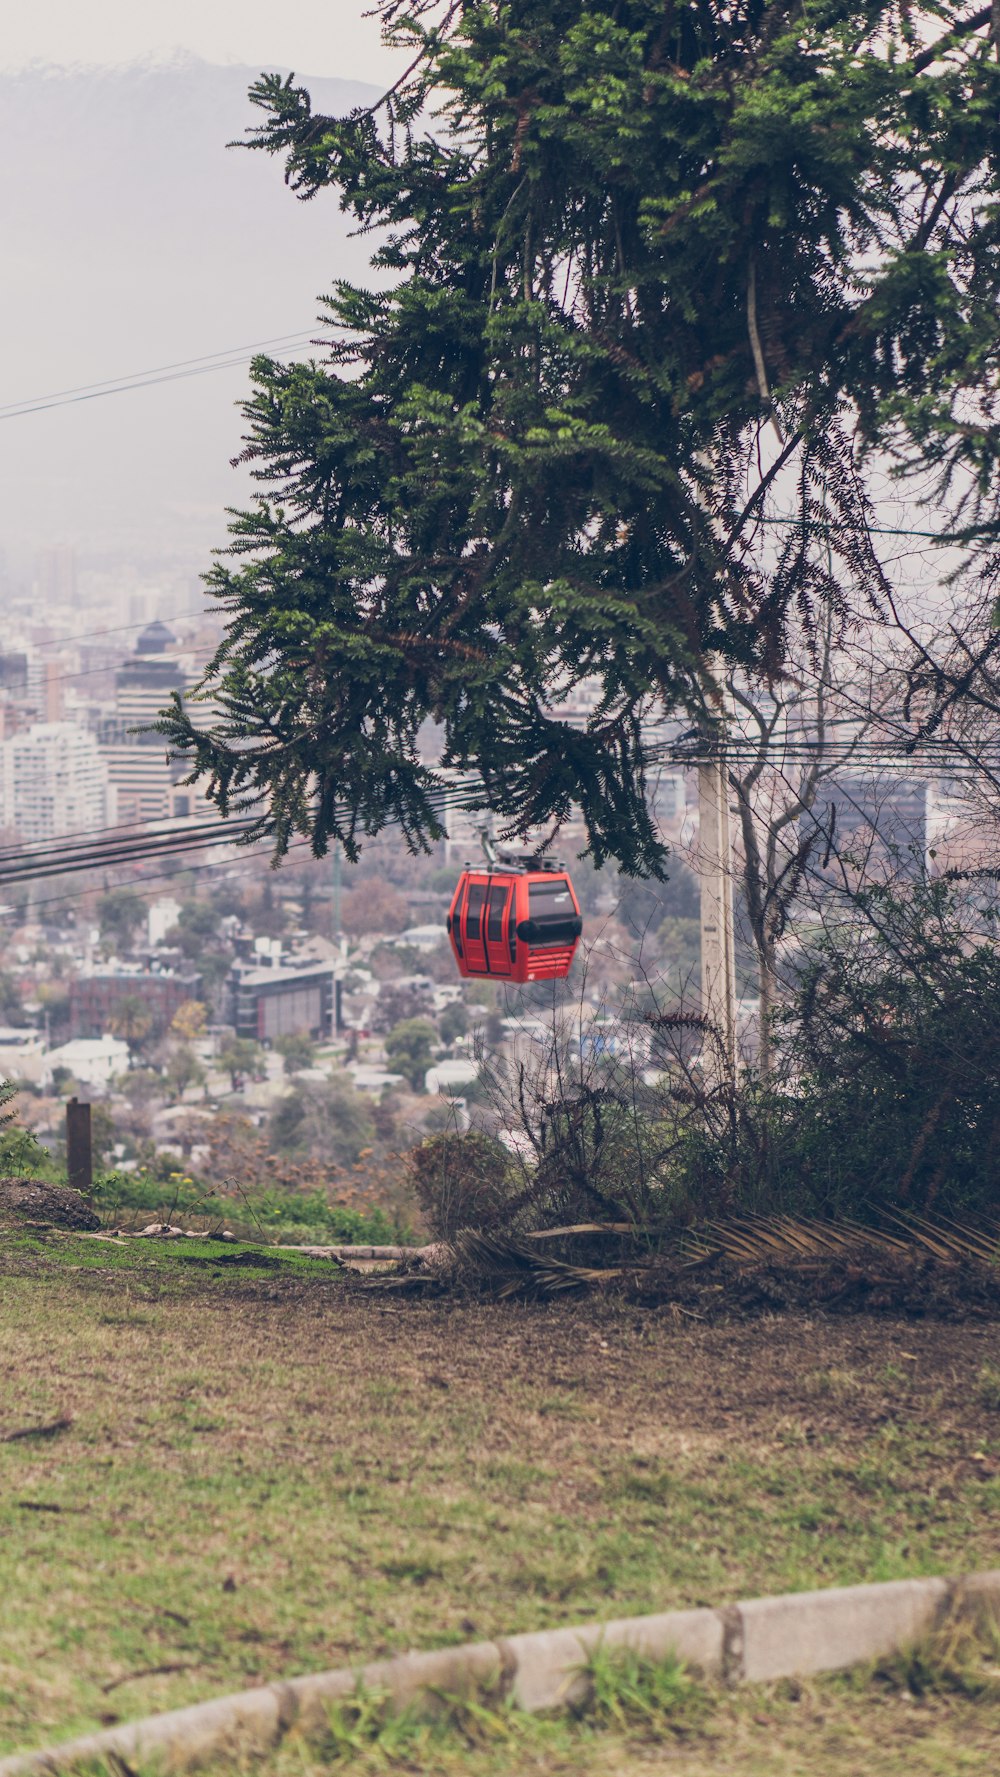 a red cable car going down a hill with a city in the background